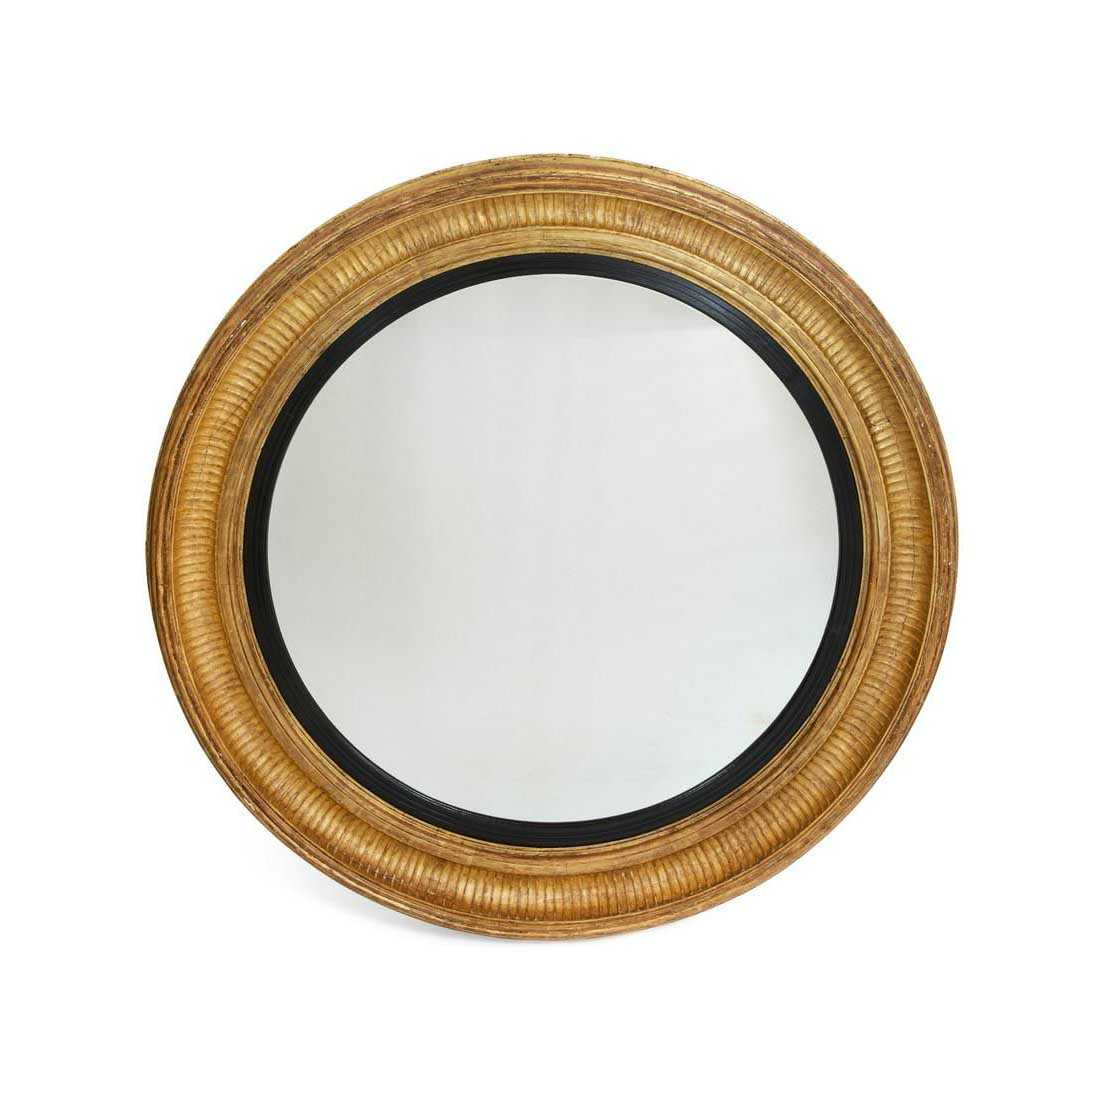 Monumental early 19th-century Regency circular giltwood mirror, which sold for $10,000 plus the buyer’s premium in May 2022. Image courtesy of Andrew Jones Auctions and LiveAuctioneers.